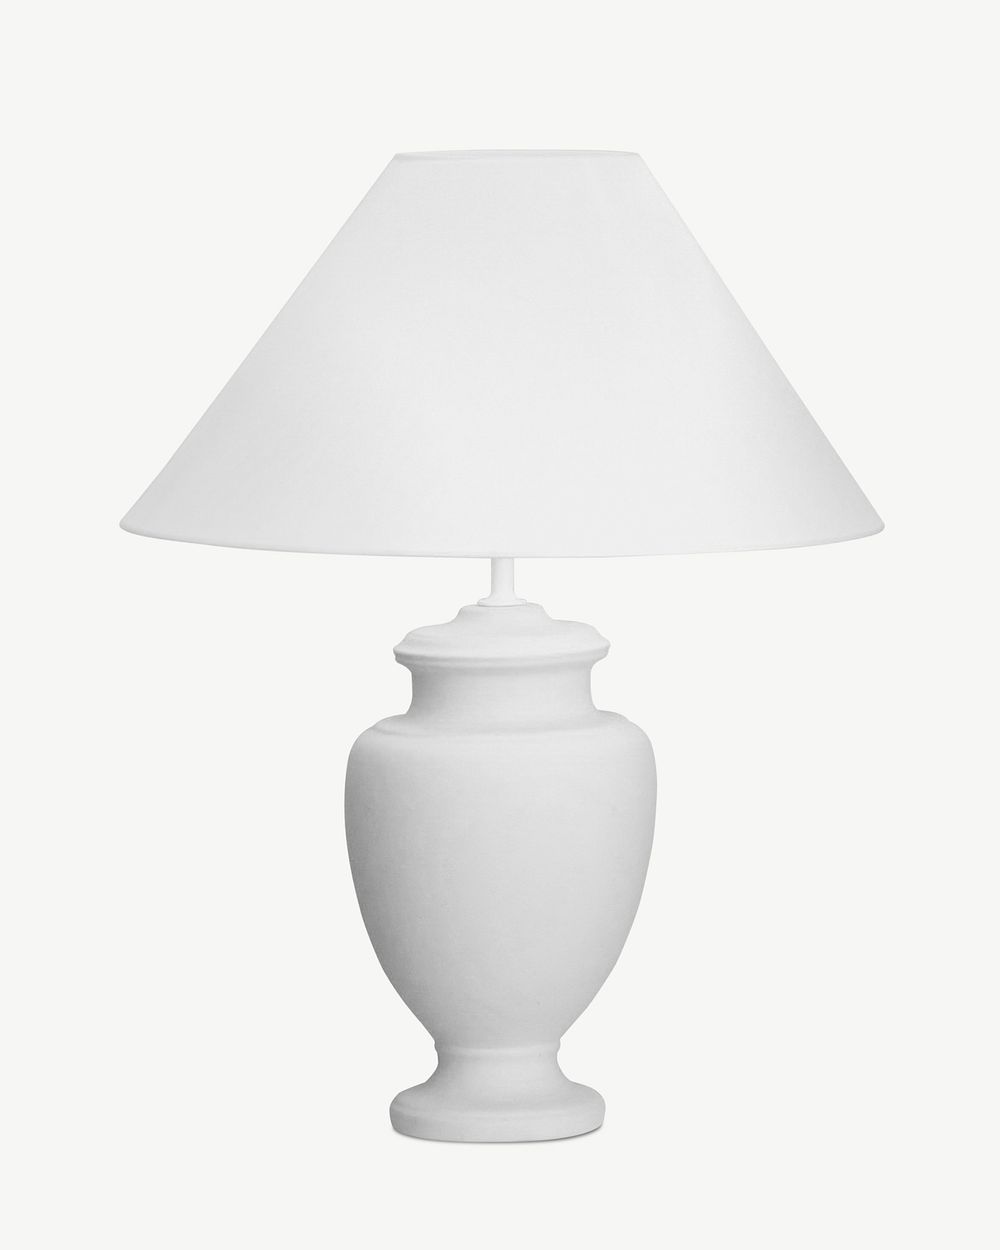 Table lamp collage element psd